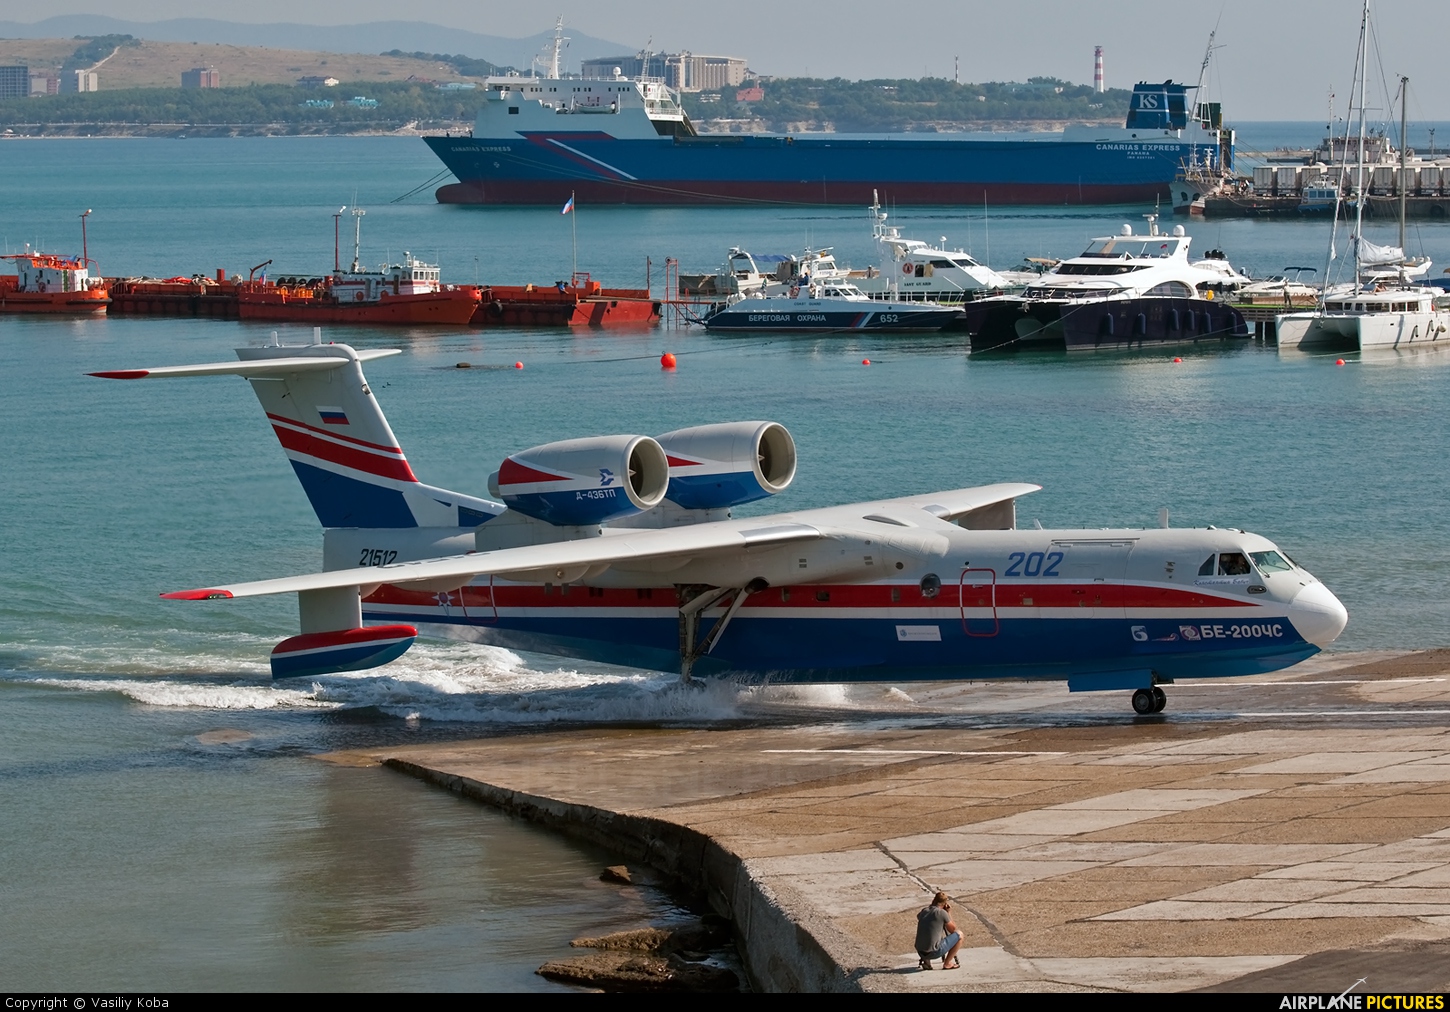 Russian embassy in Egypt: Russia to supply four Be-200 amphibian